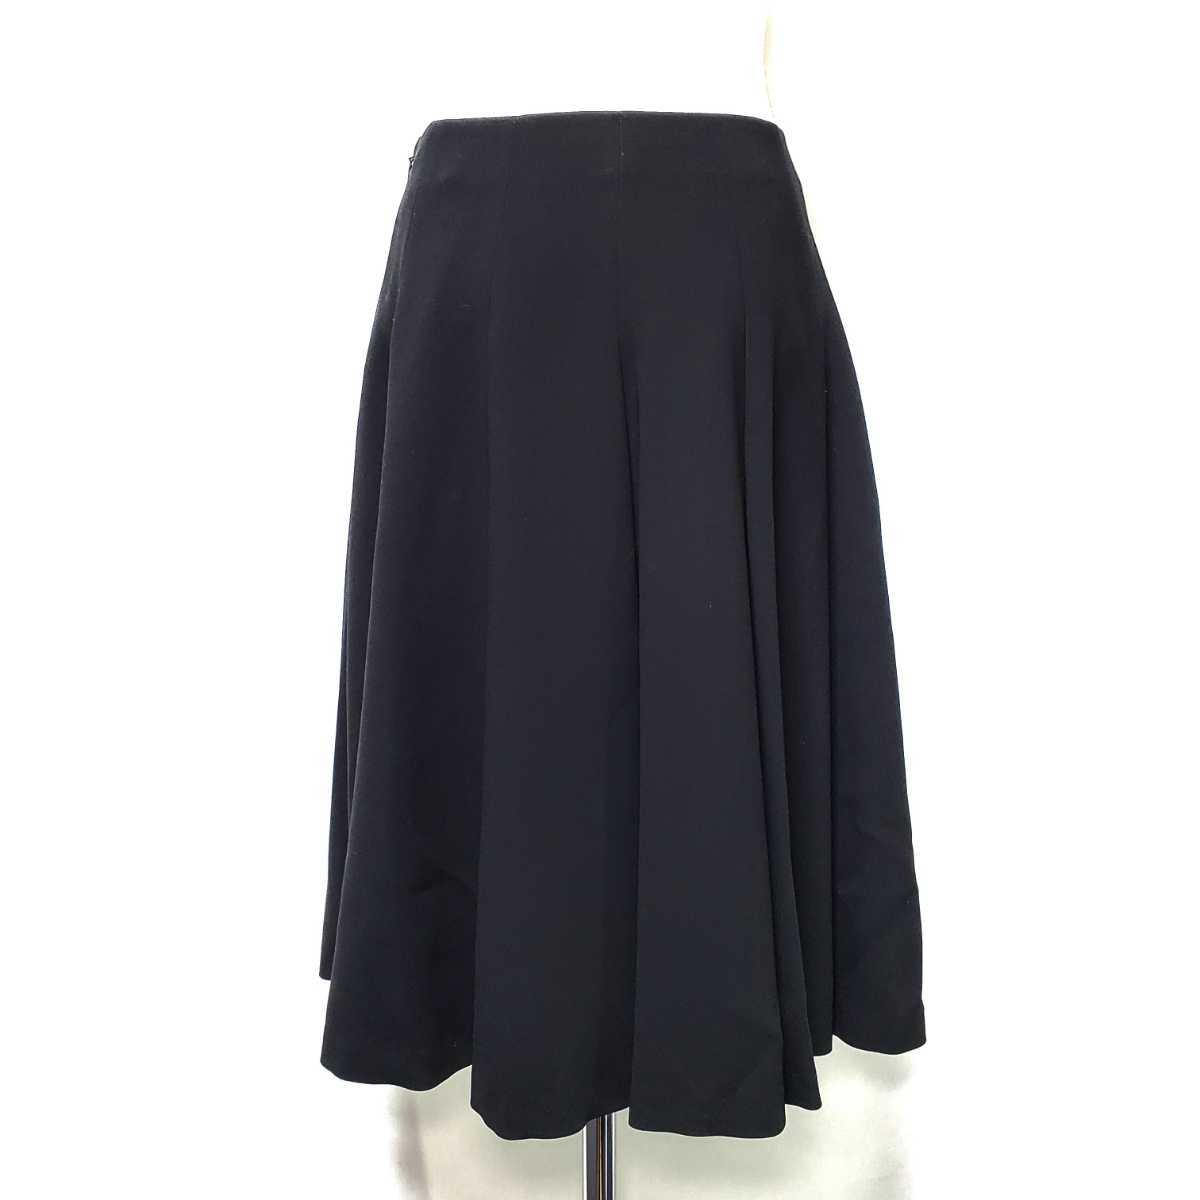 TO BE CHIC toe Be Schic black knees height skirt size 40( approximately L size corresponding )